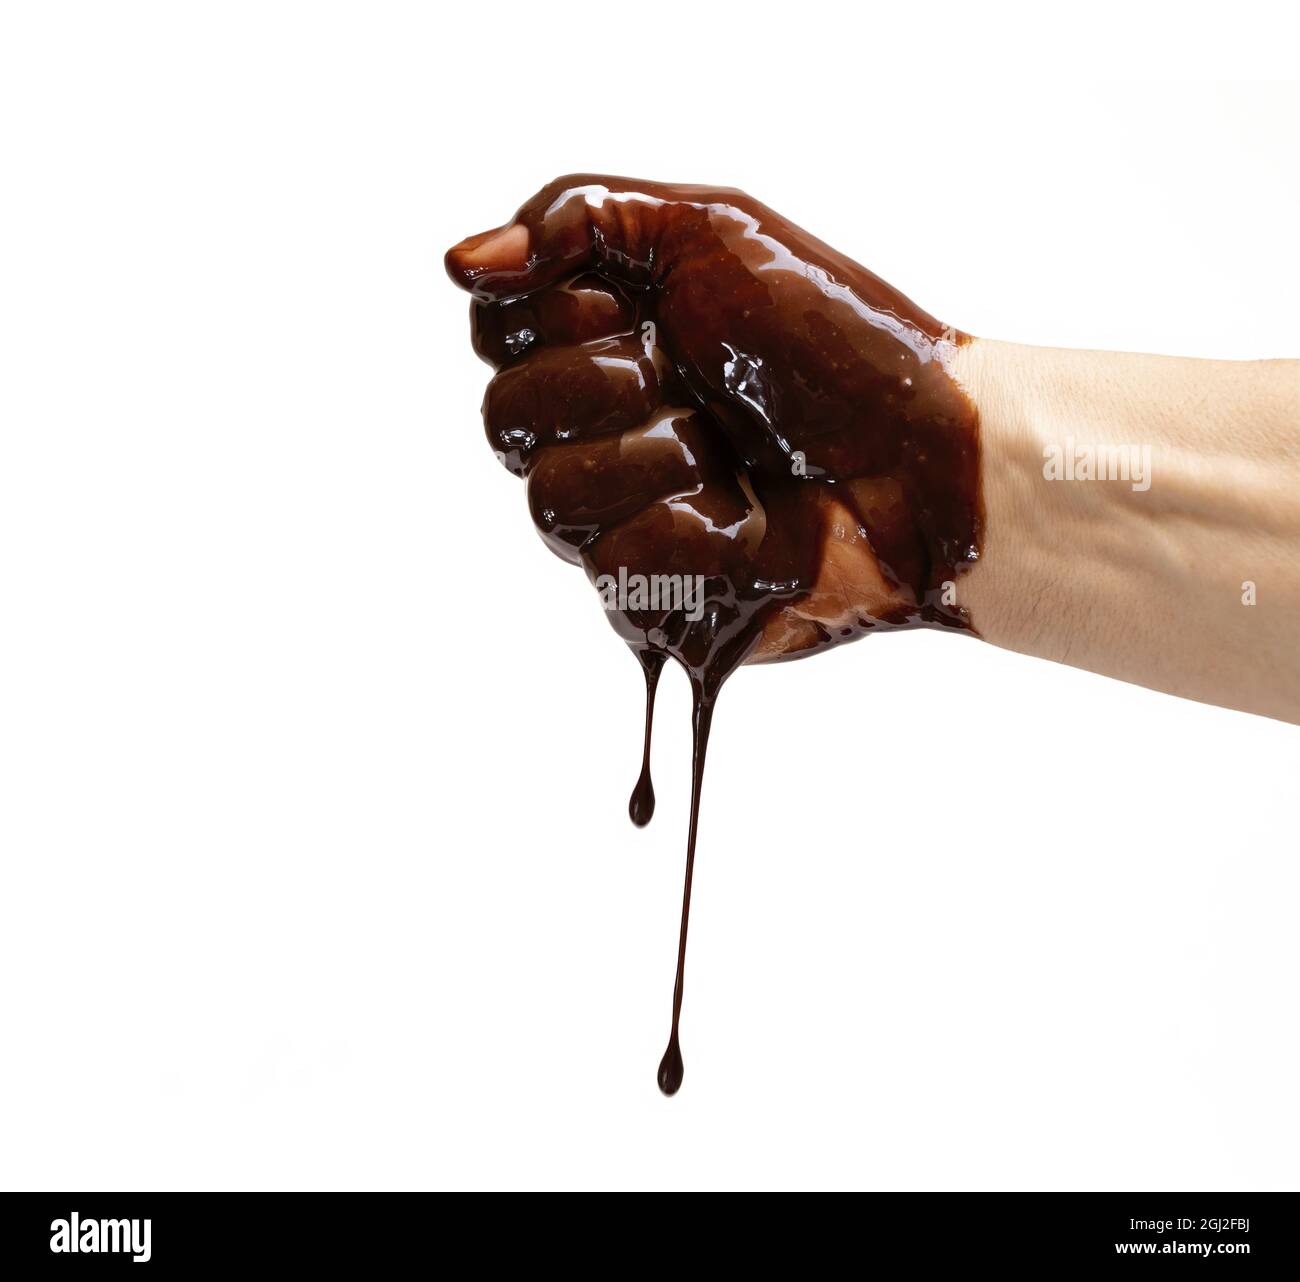 A Mediterranean Caucasian Hand Clenches The Fist Of Dripping Chocolate White Background Stock